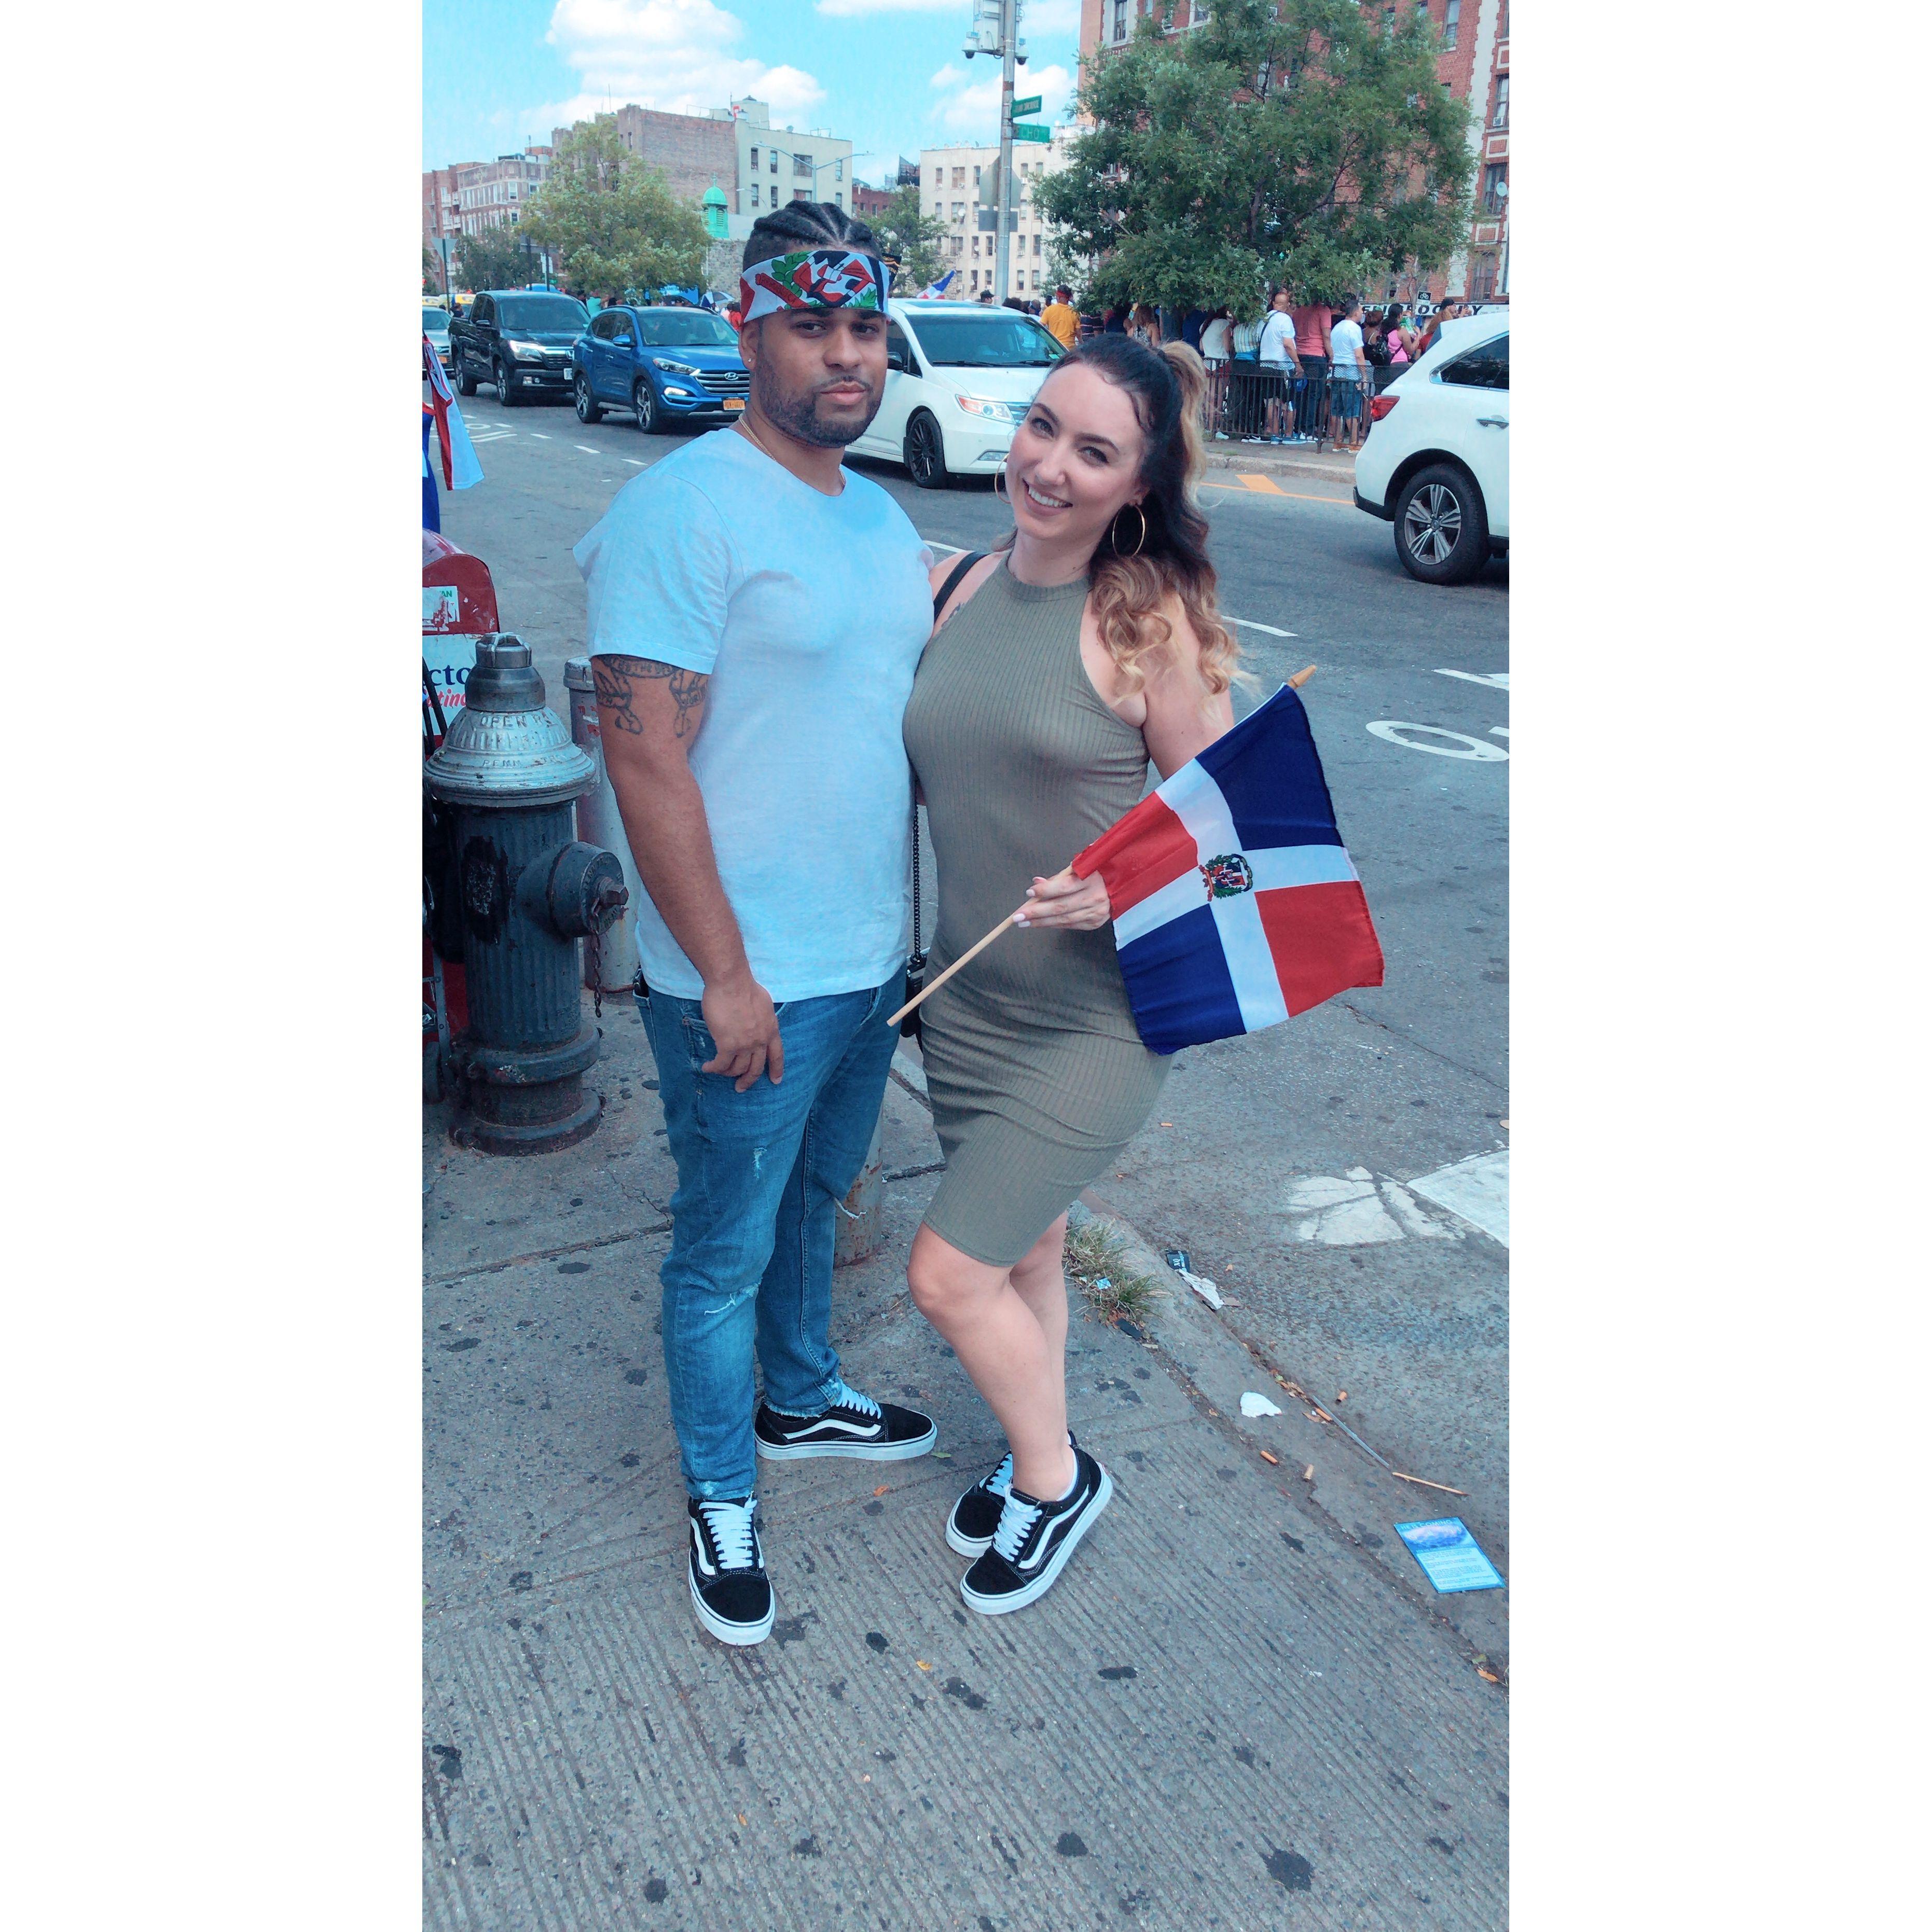 Domincan parade in the Bronx